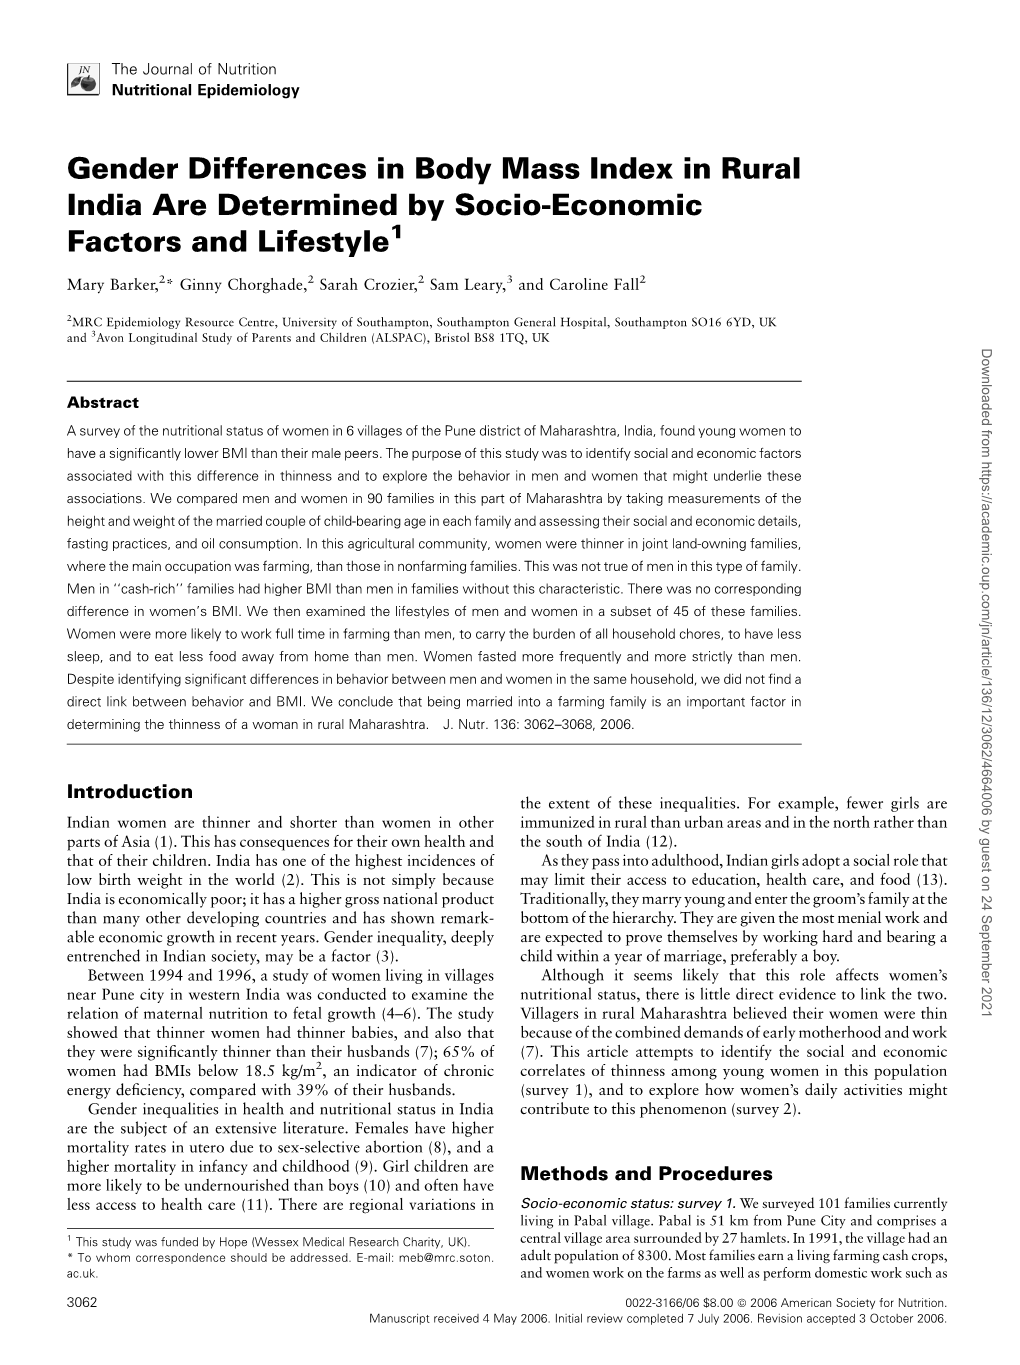 Gender Differences in Body Mass Index in Rural India Are Determined by Socio-Economic Factors and Lifestyle1